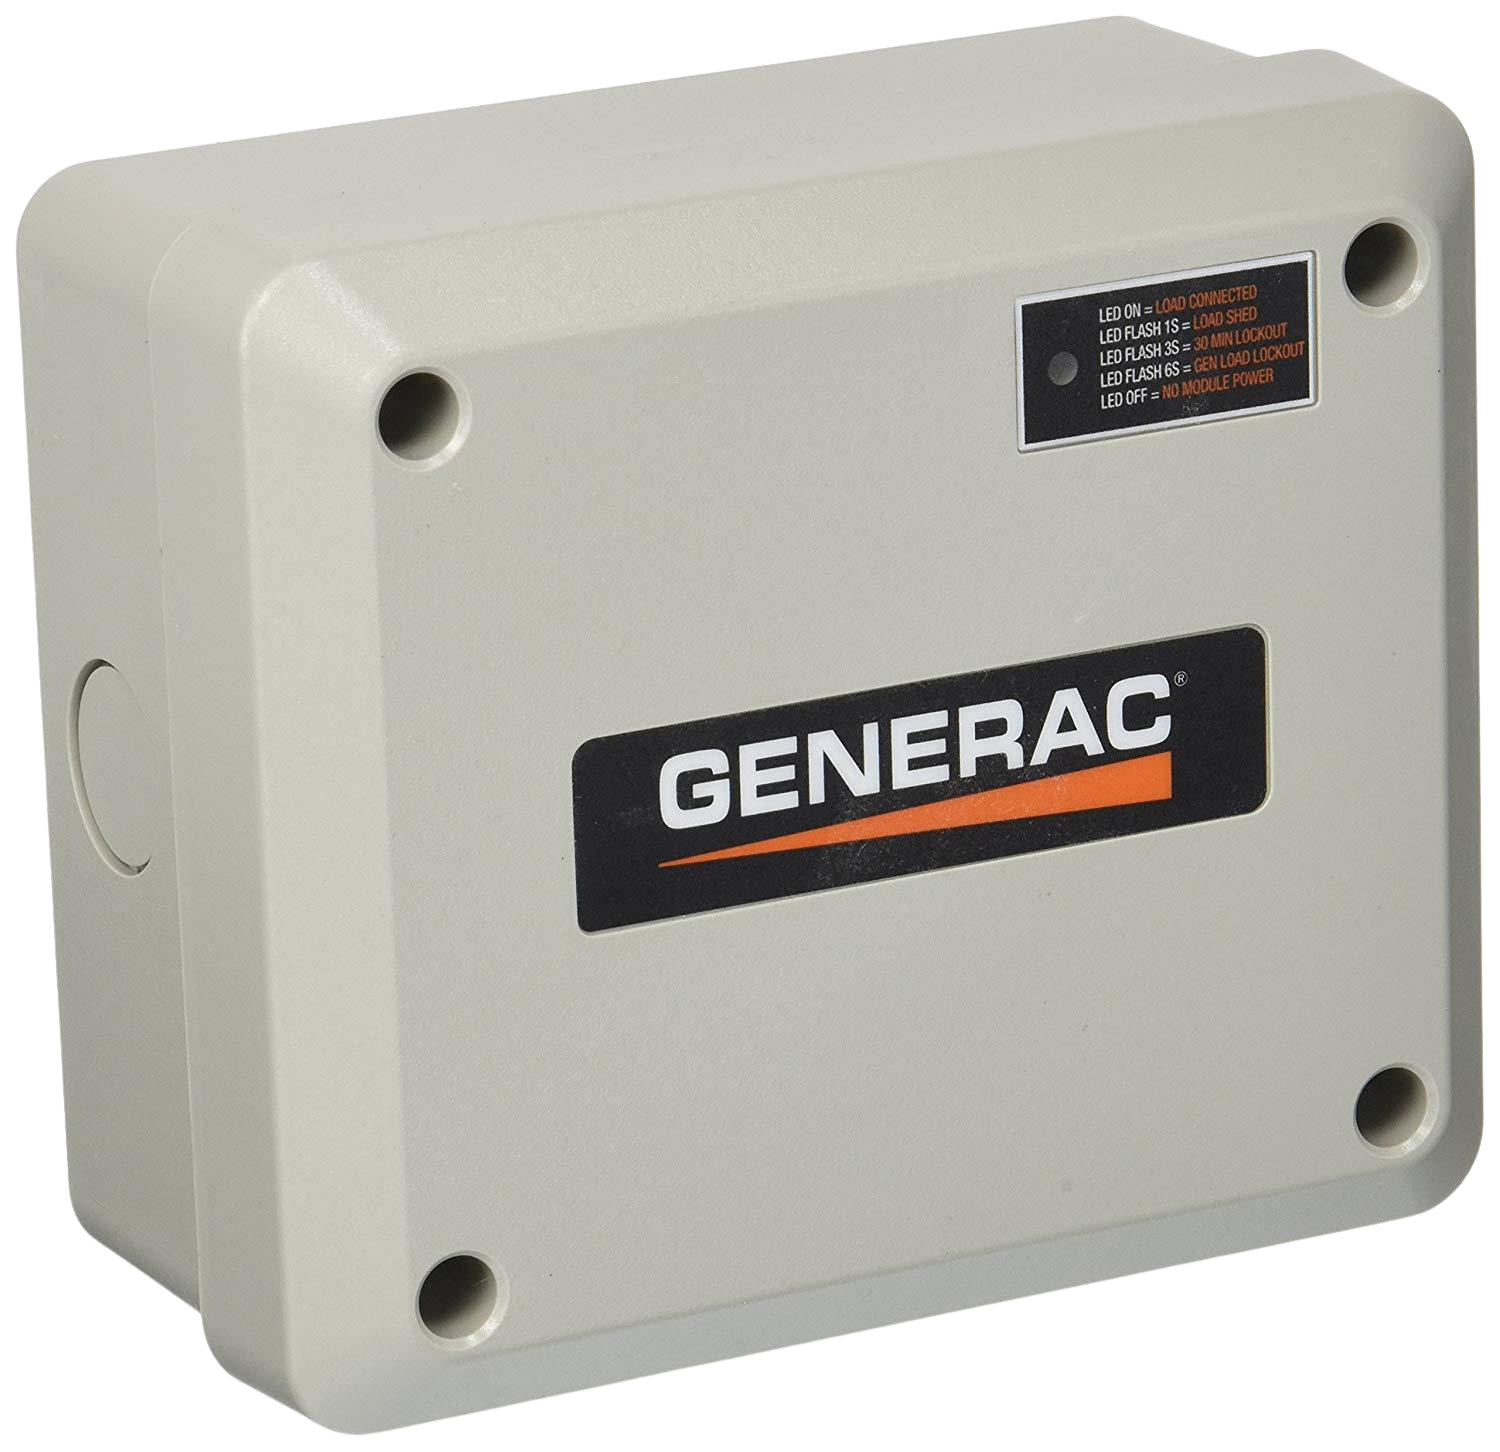 Generac Power Systems - Mobile Link Wi-Fi Ethernet